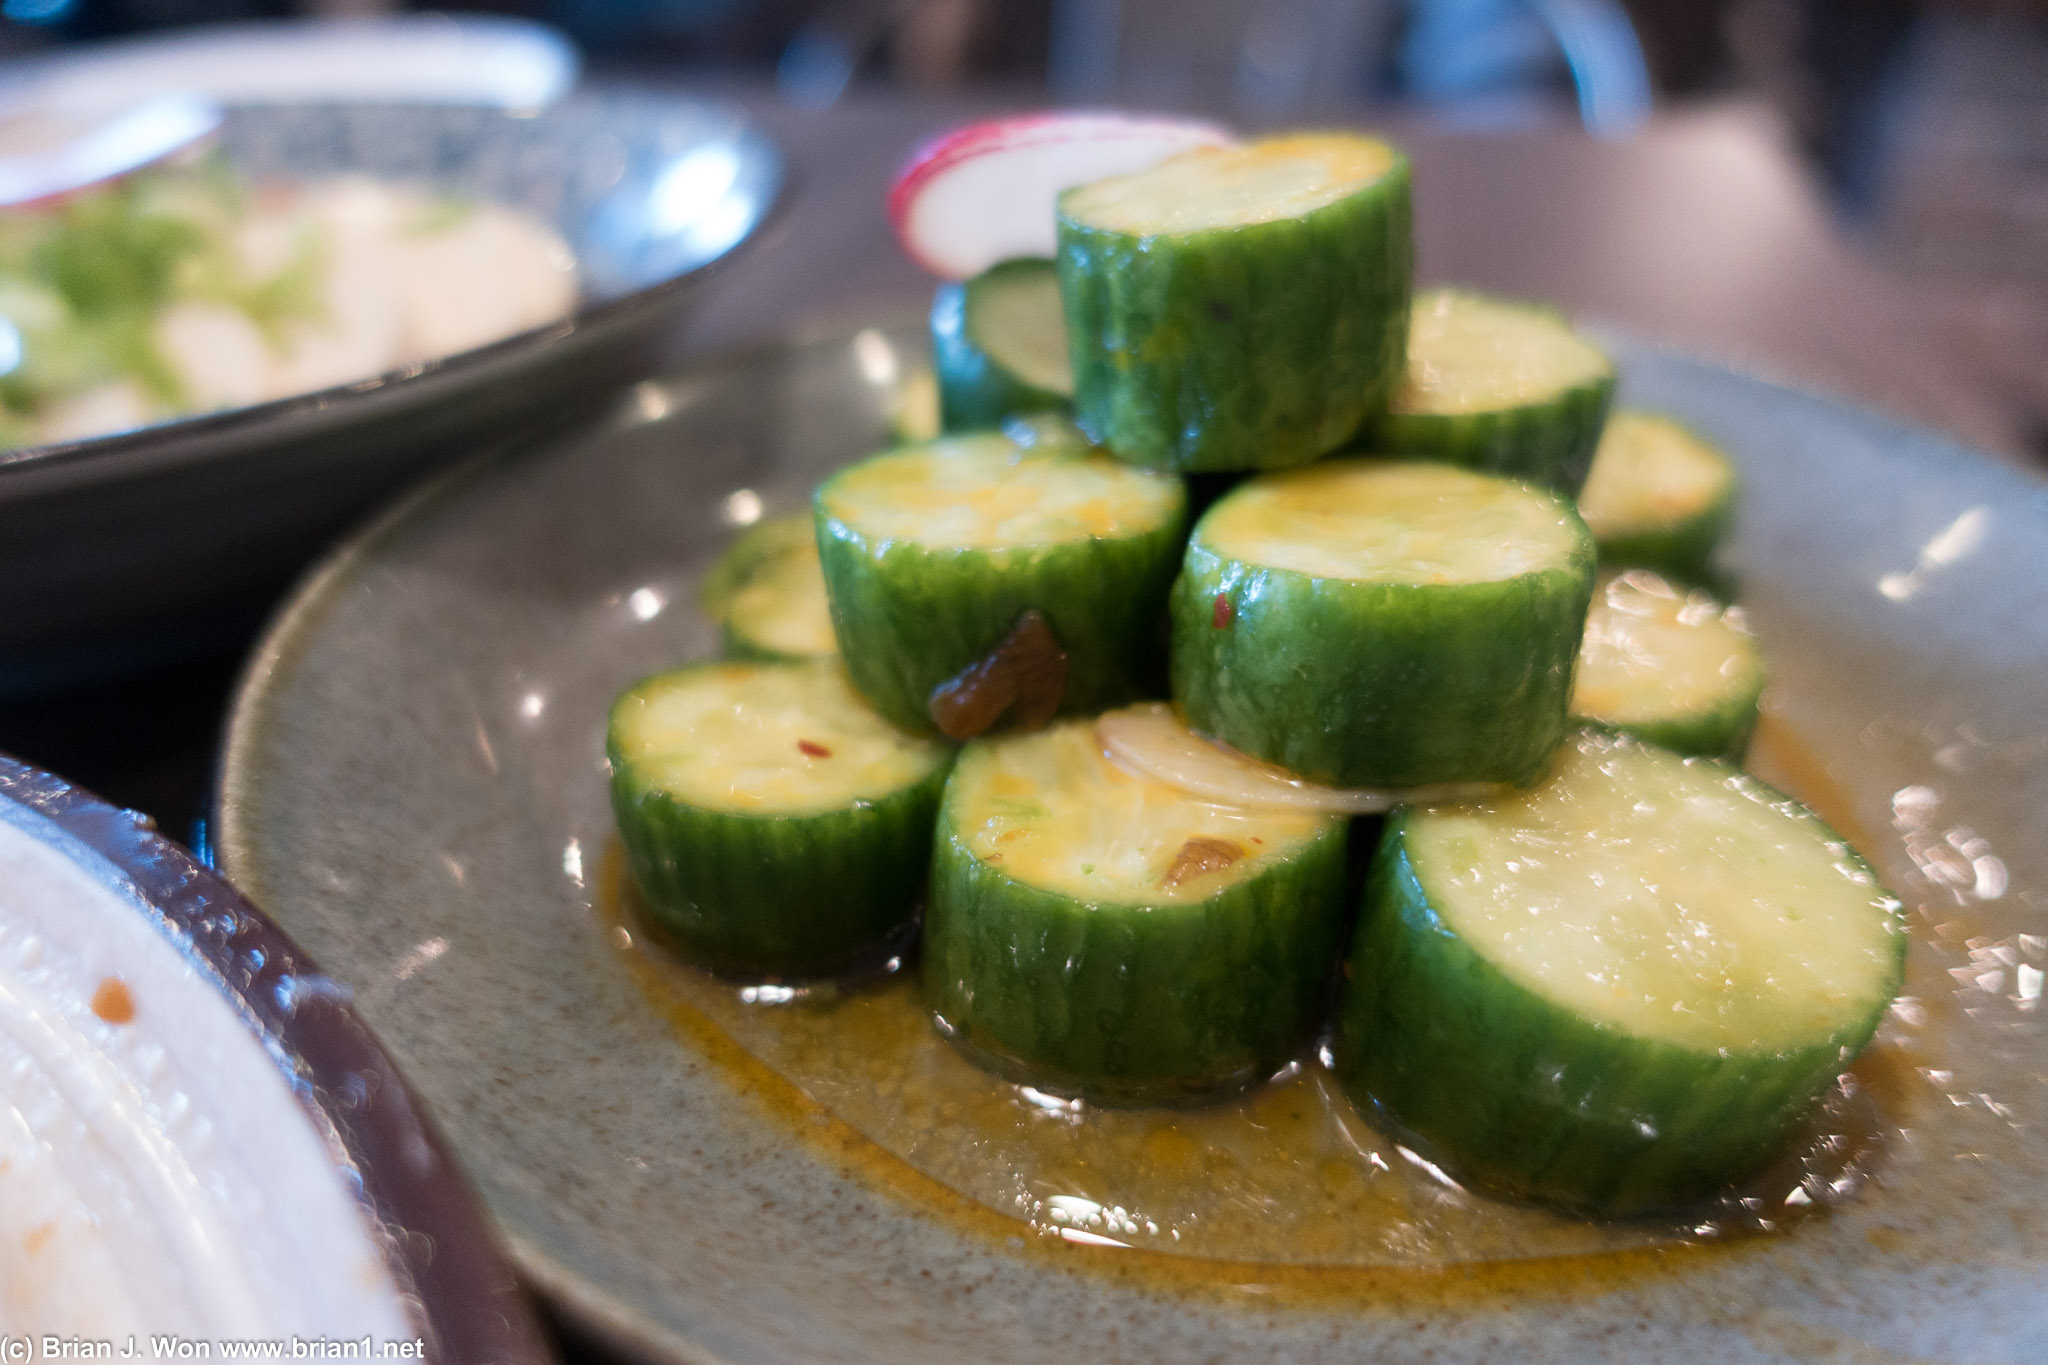 The closest competitor to Din Tai Fung's cold cucumber that I've seen.